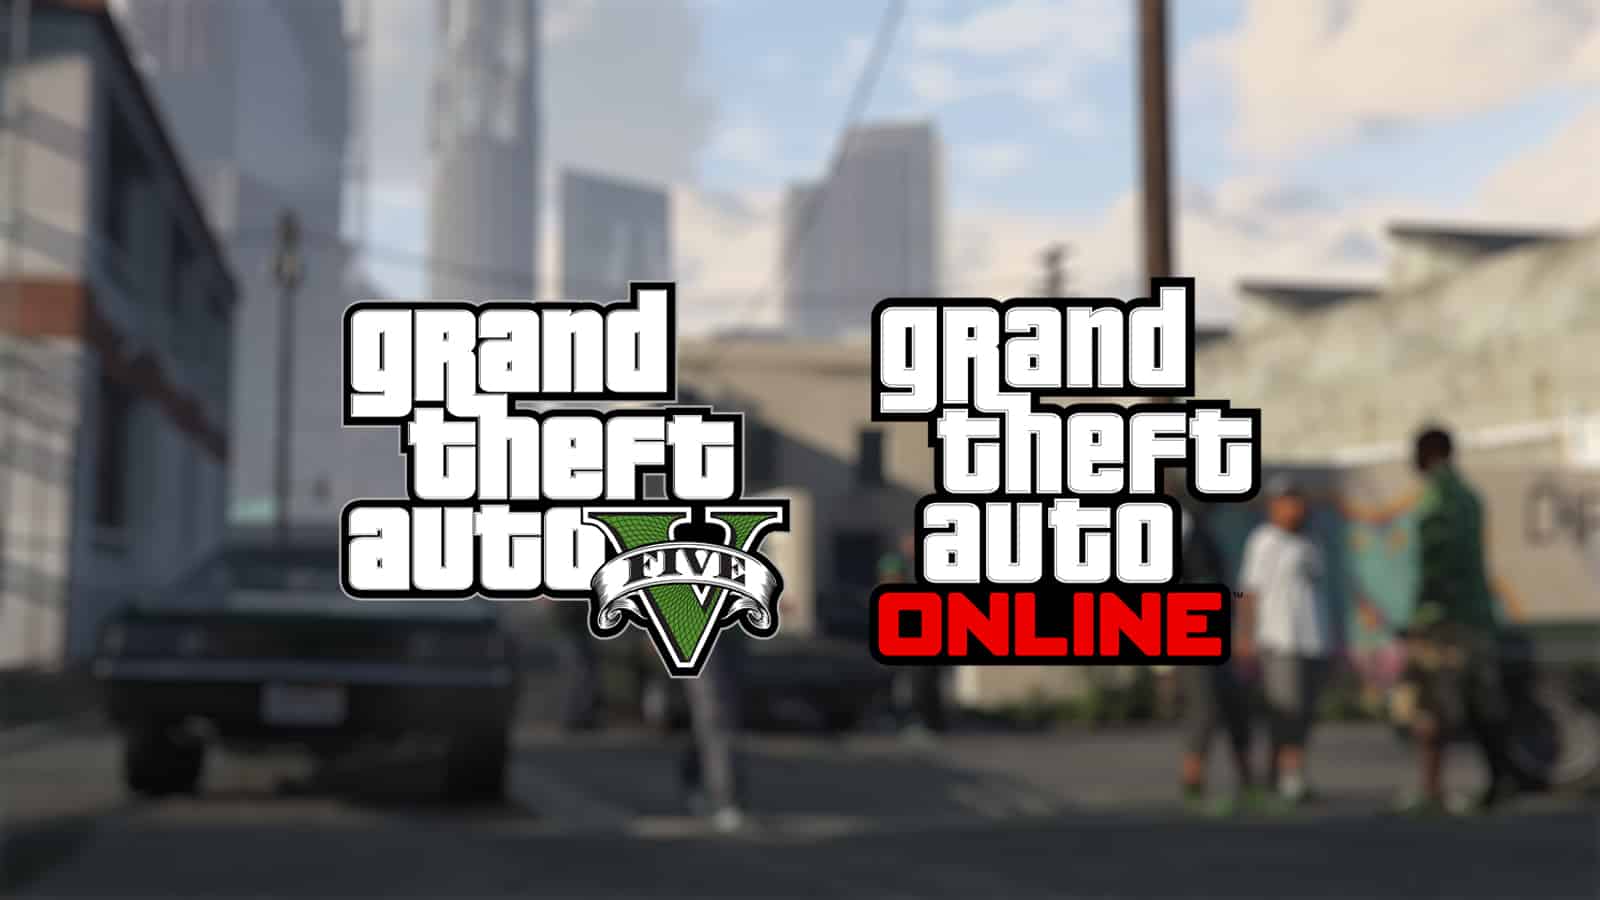 An image of gameplay showing the GTA 5 and GTA Online logos